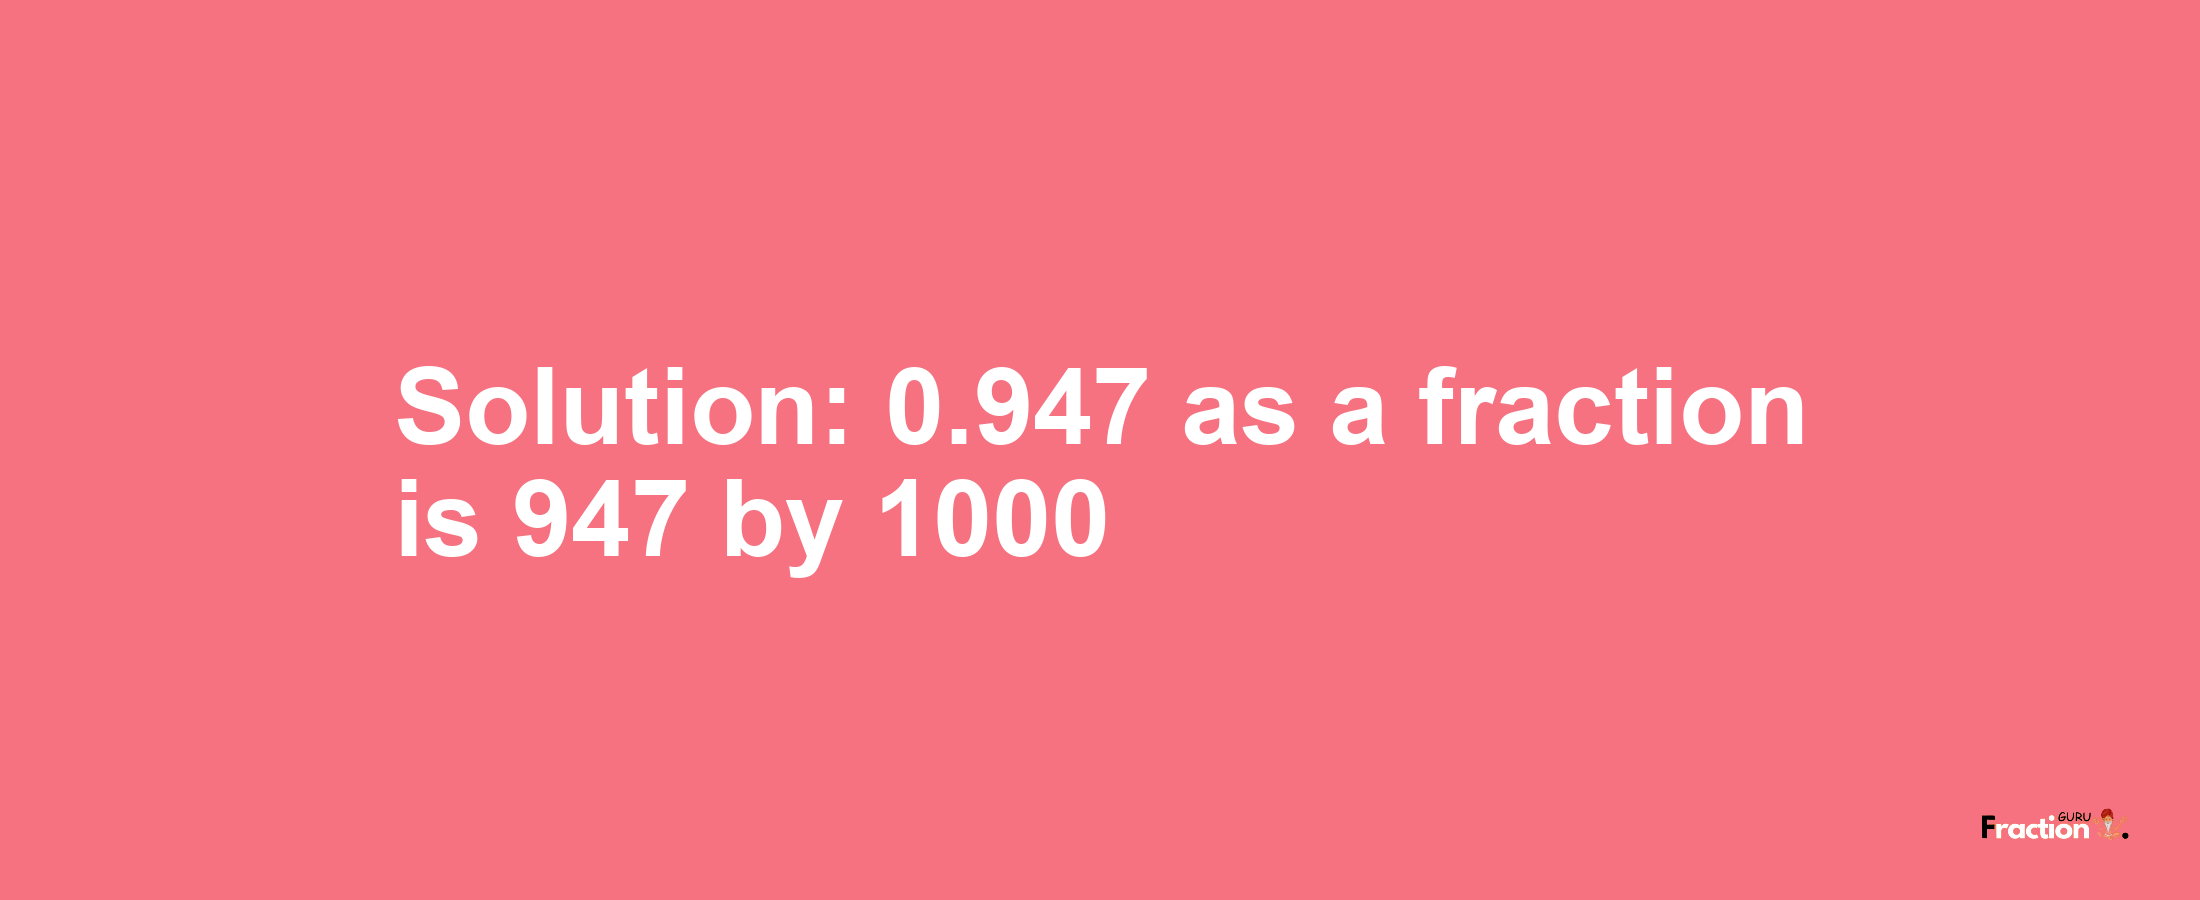 Solution:0.947 as a fraction is 947/1000